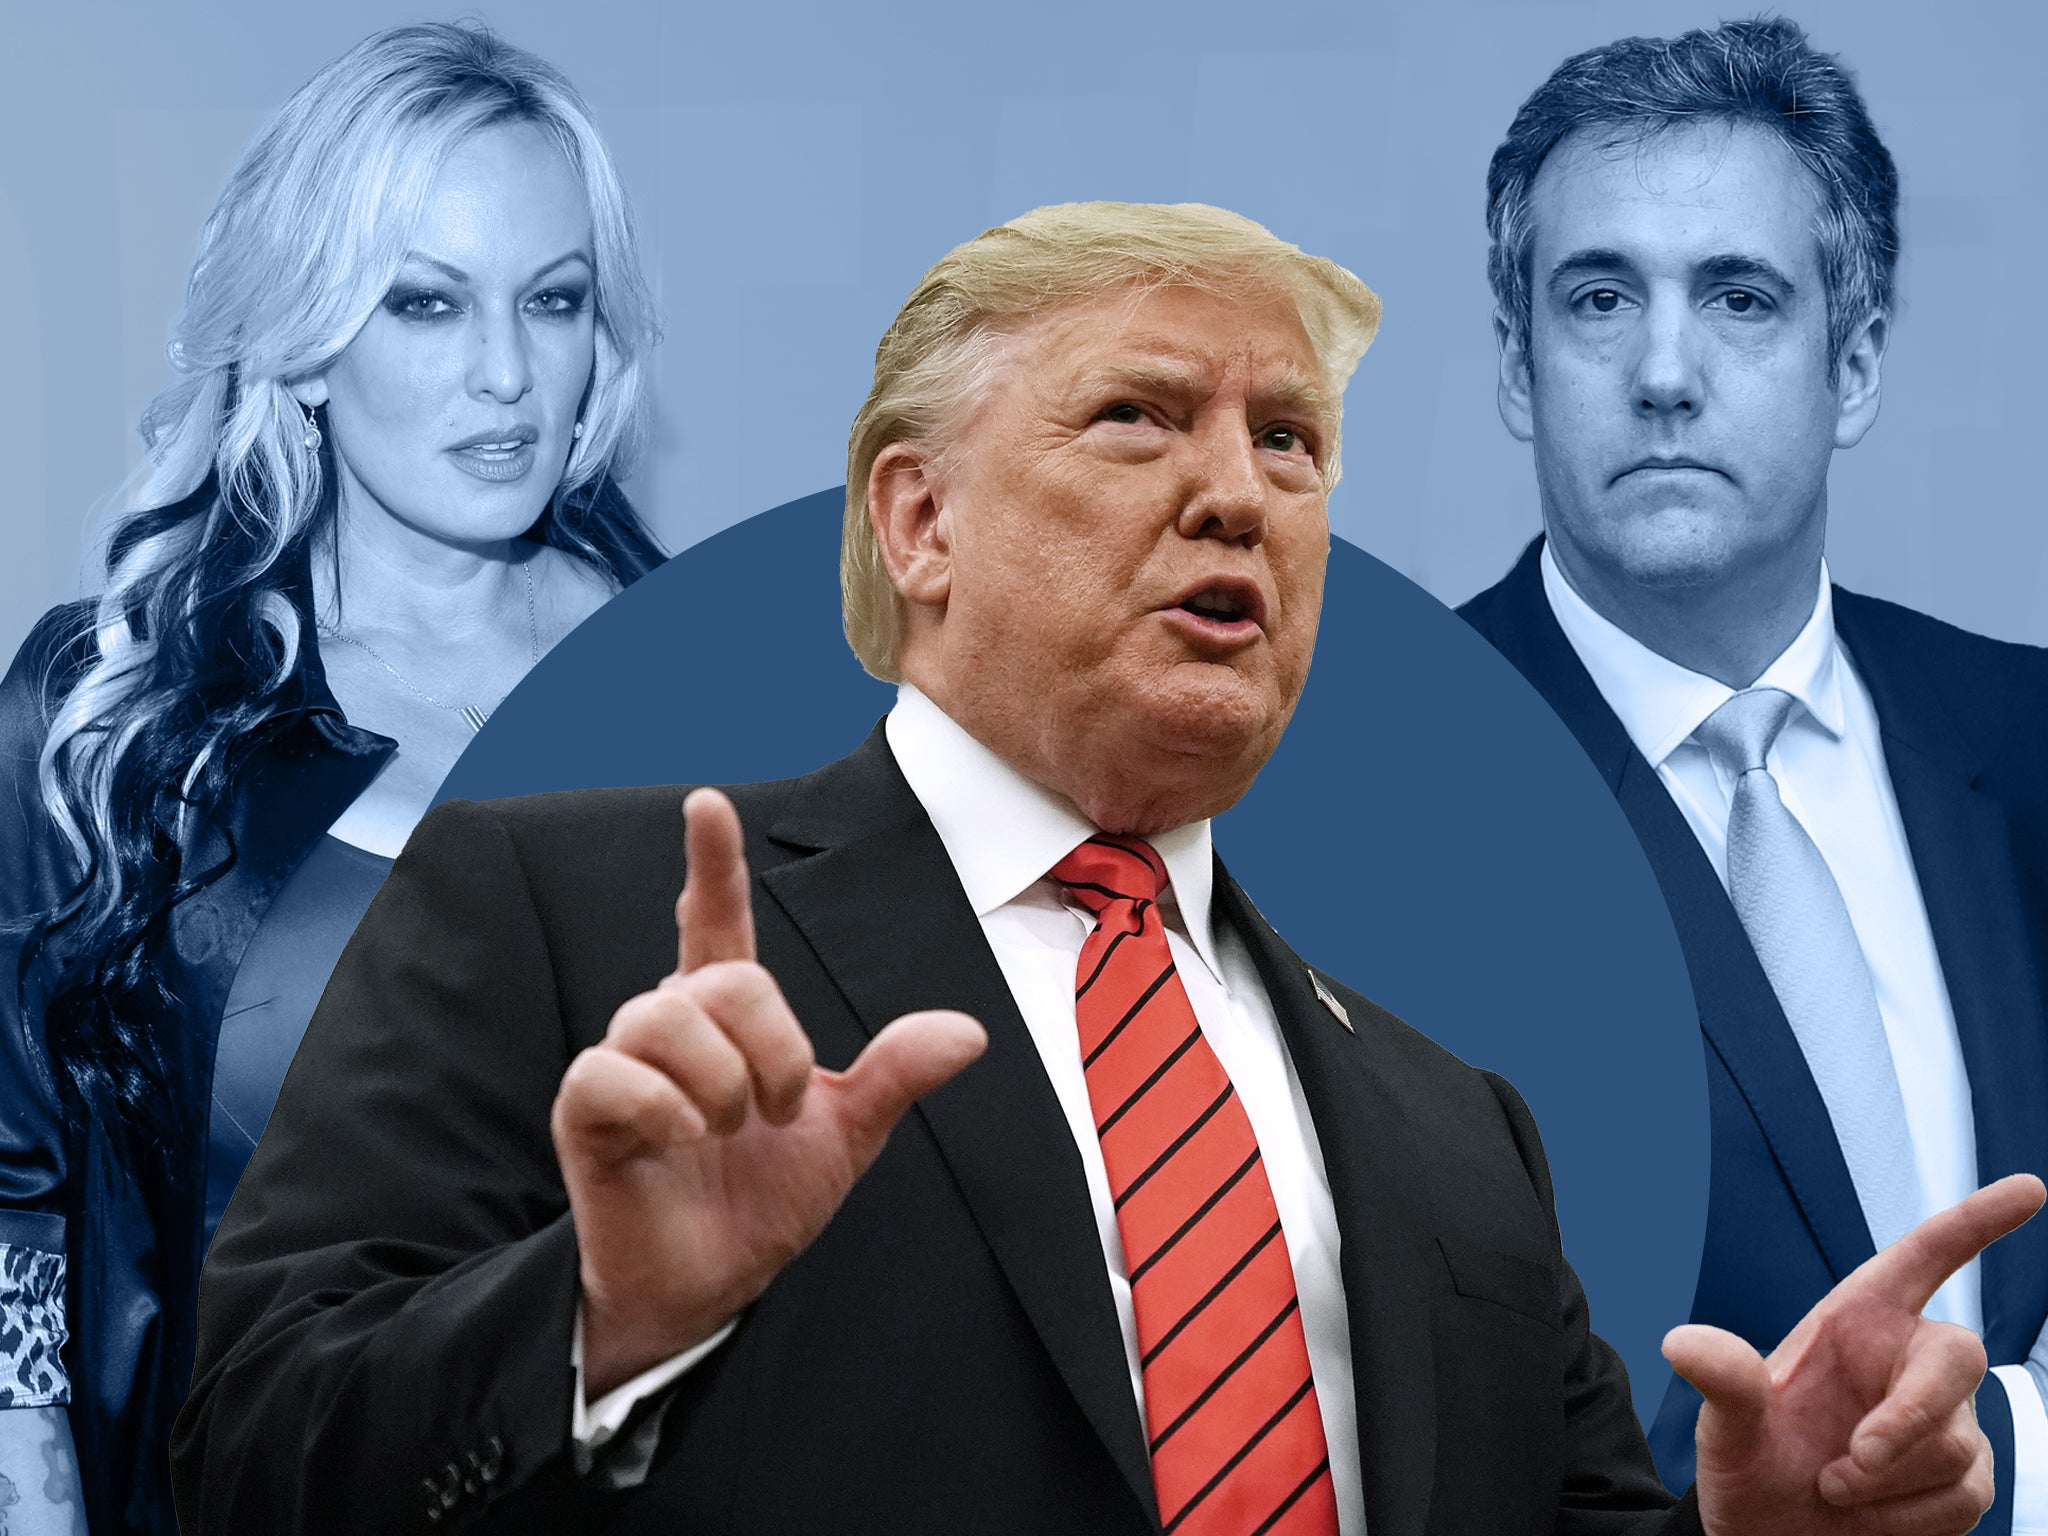 Adult film star Stormy Daniels has proved a major headache for former president Donald Trump and his former fixer, Michael Cohen